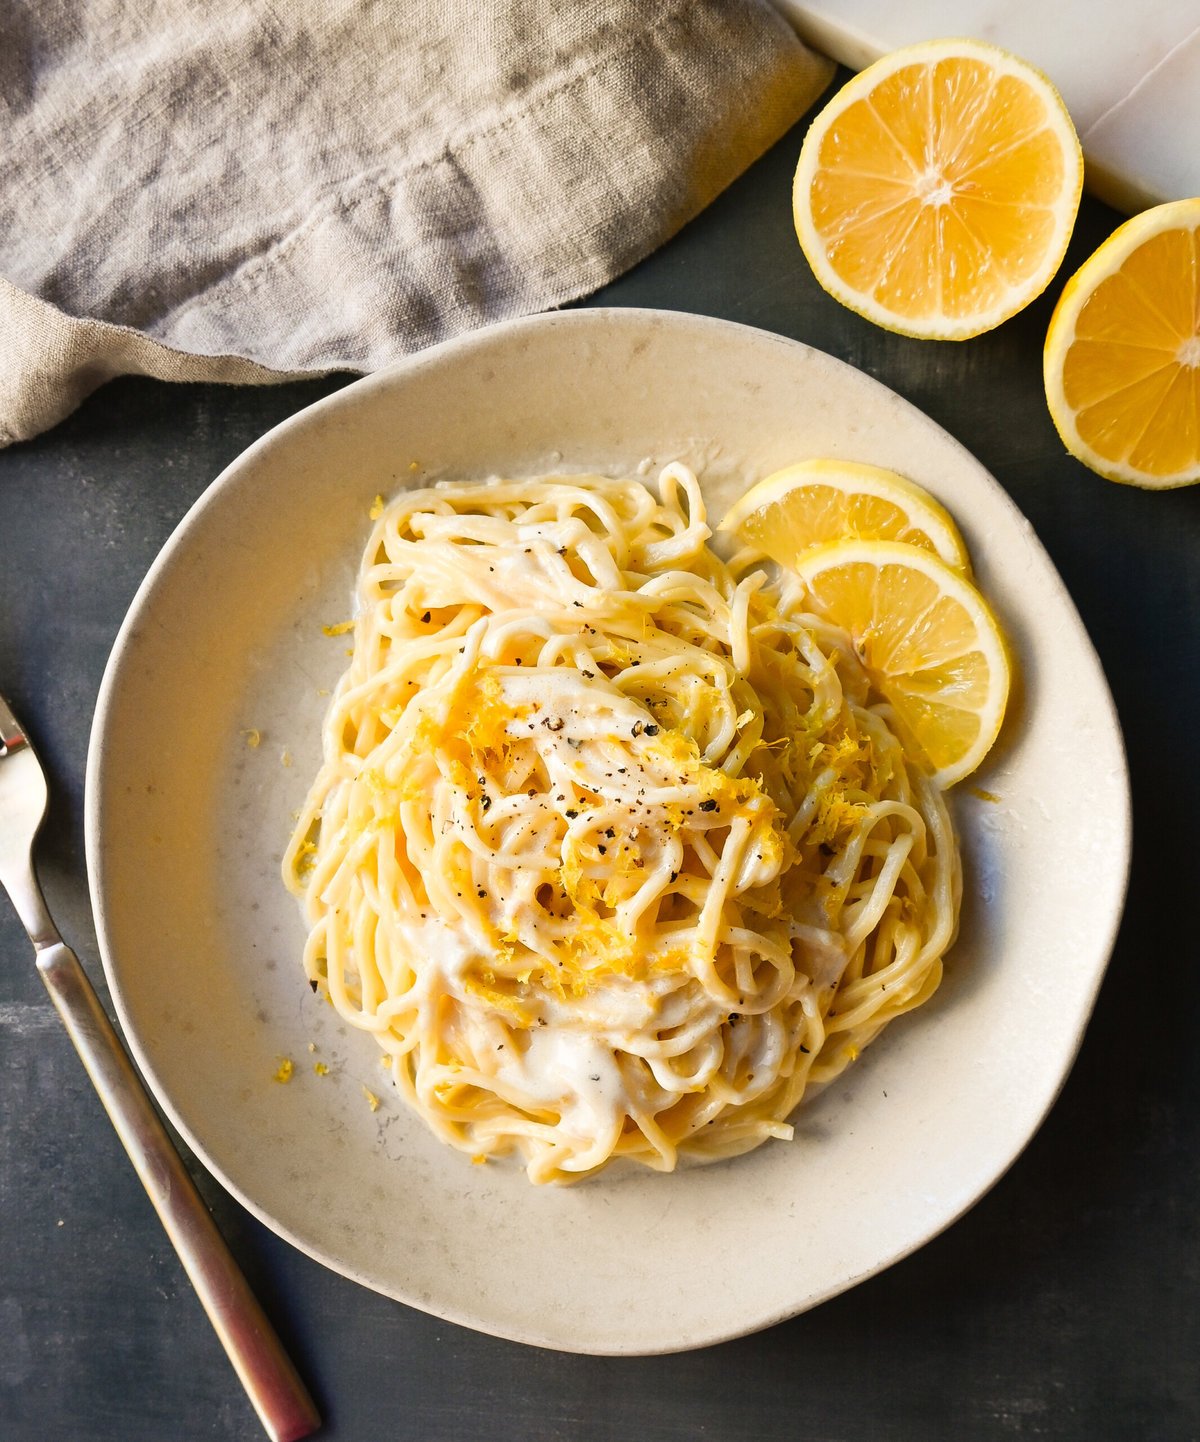 Lemon Pasta (Spaghetti al Limone). This creamy and tangy pasta dish features fresh lemon cream sauce tossed with fresh pasta. This Spaghetti al Limone is vibrant, fresh, and perfectly creamy and is so easy to make!